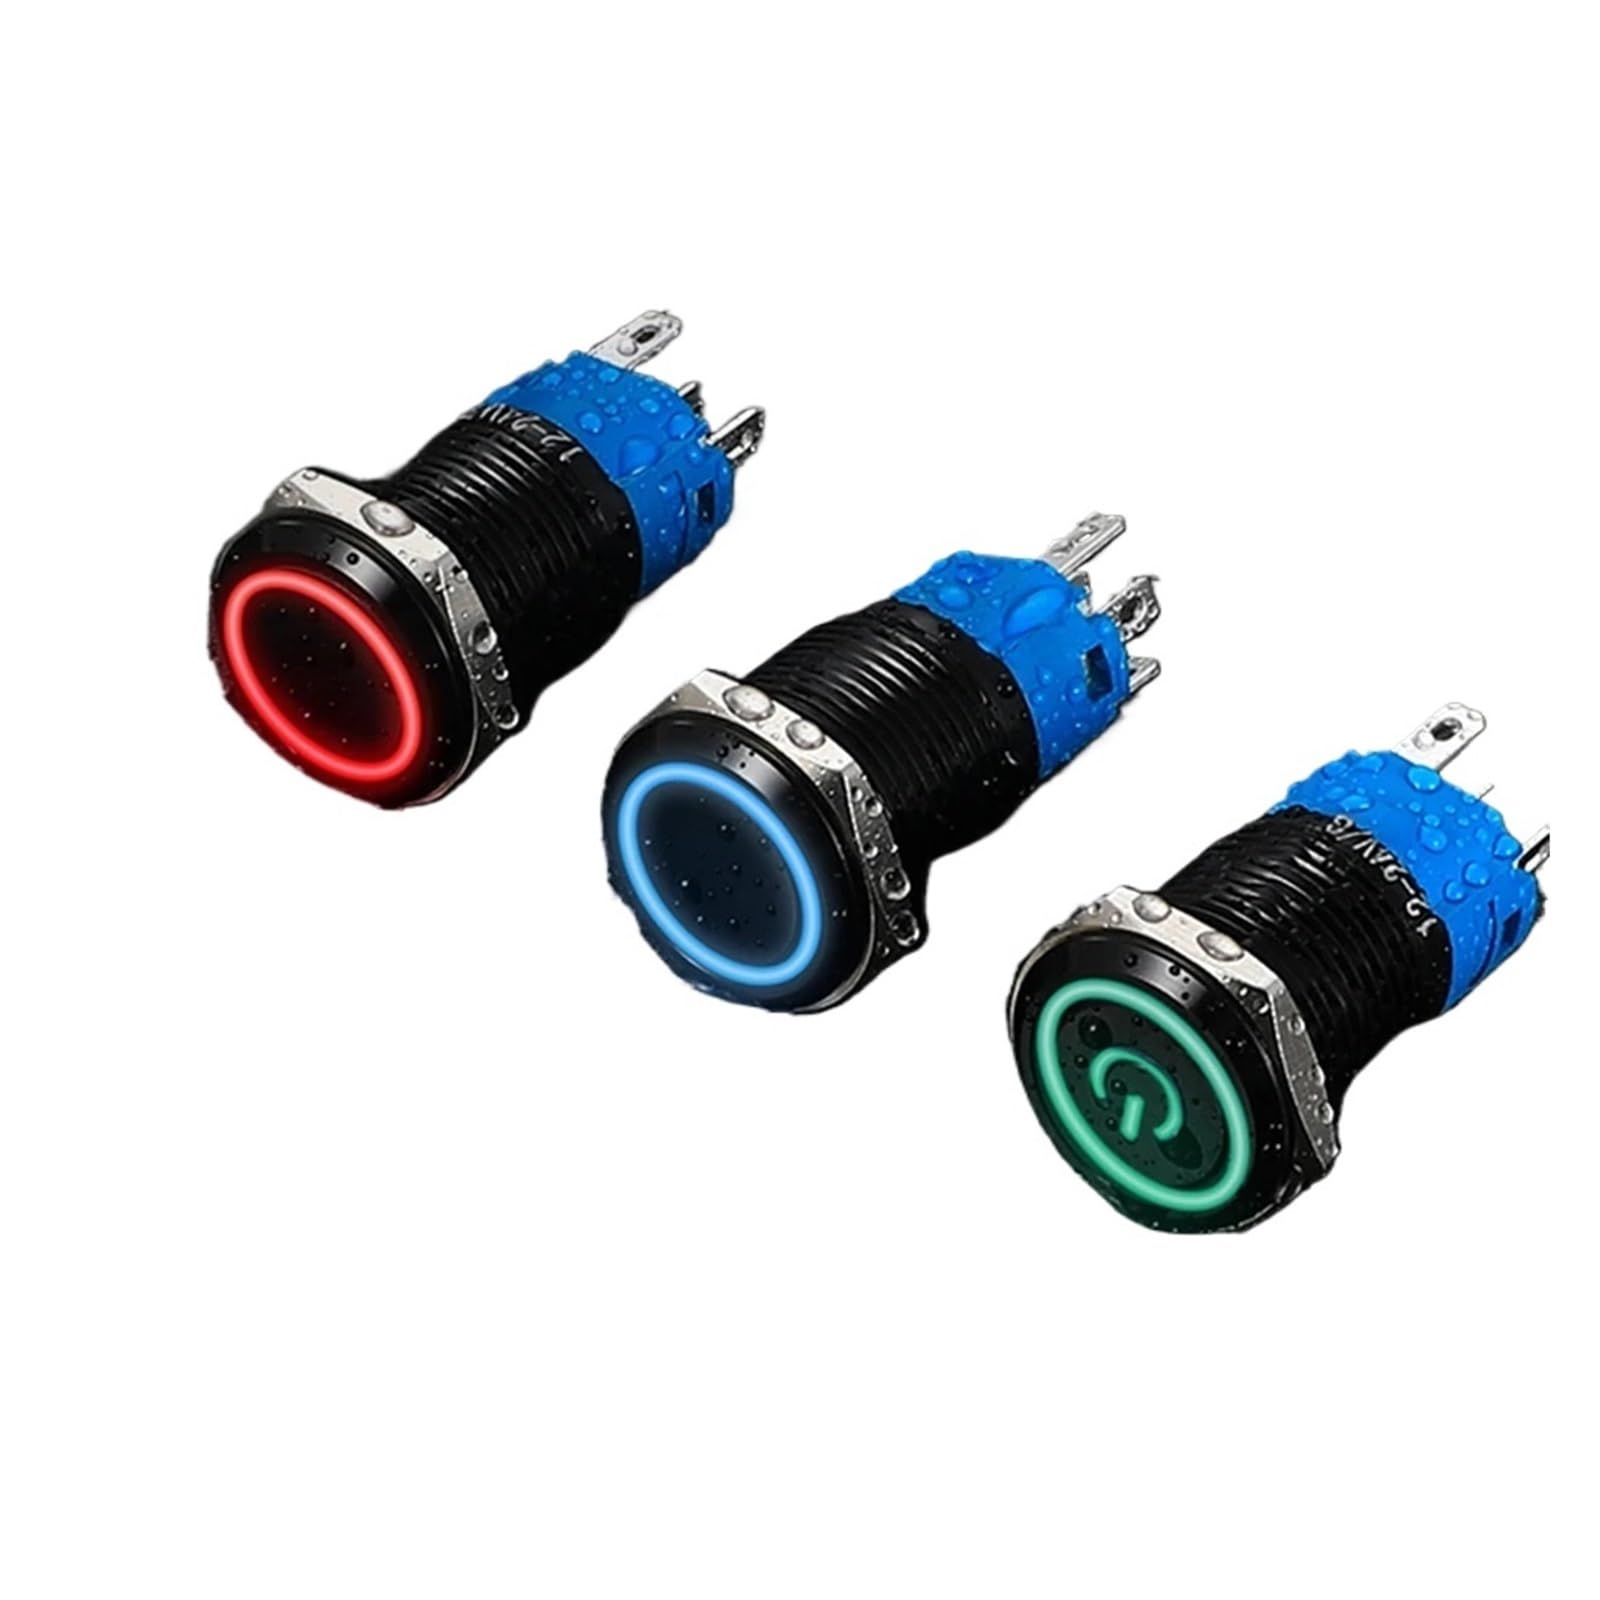 16/19/22mm Waterproof Metal Push Button Switch Momentary Latching Car Round LED Light Power Symbol 5V 6V 12V 24V 220V Red Blue ZMBMNNWQ(Red Power Symbol,22MM_12-24V) von ZMBMNNWQ